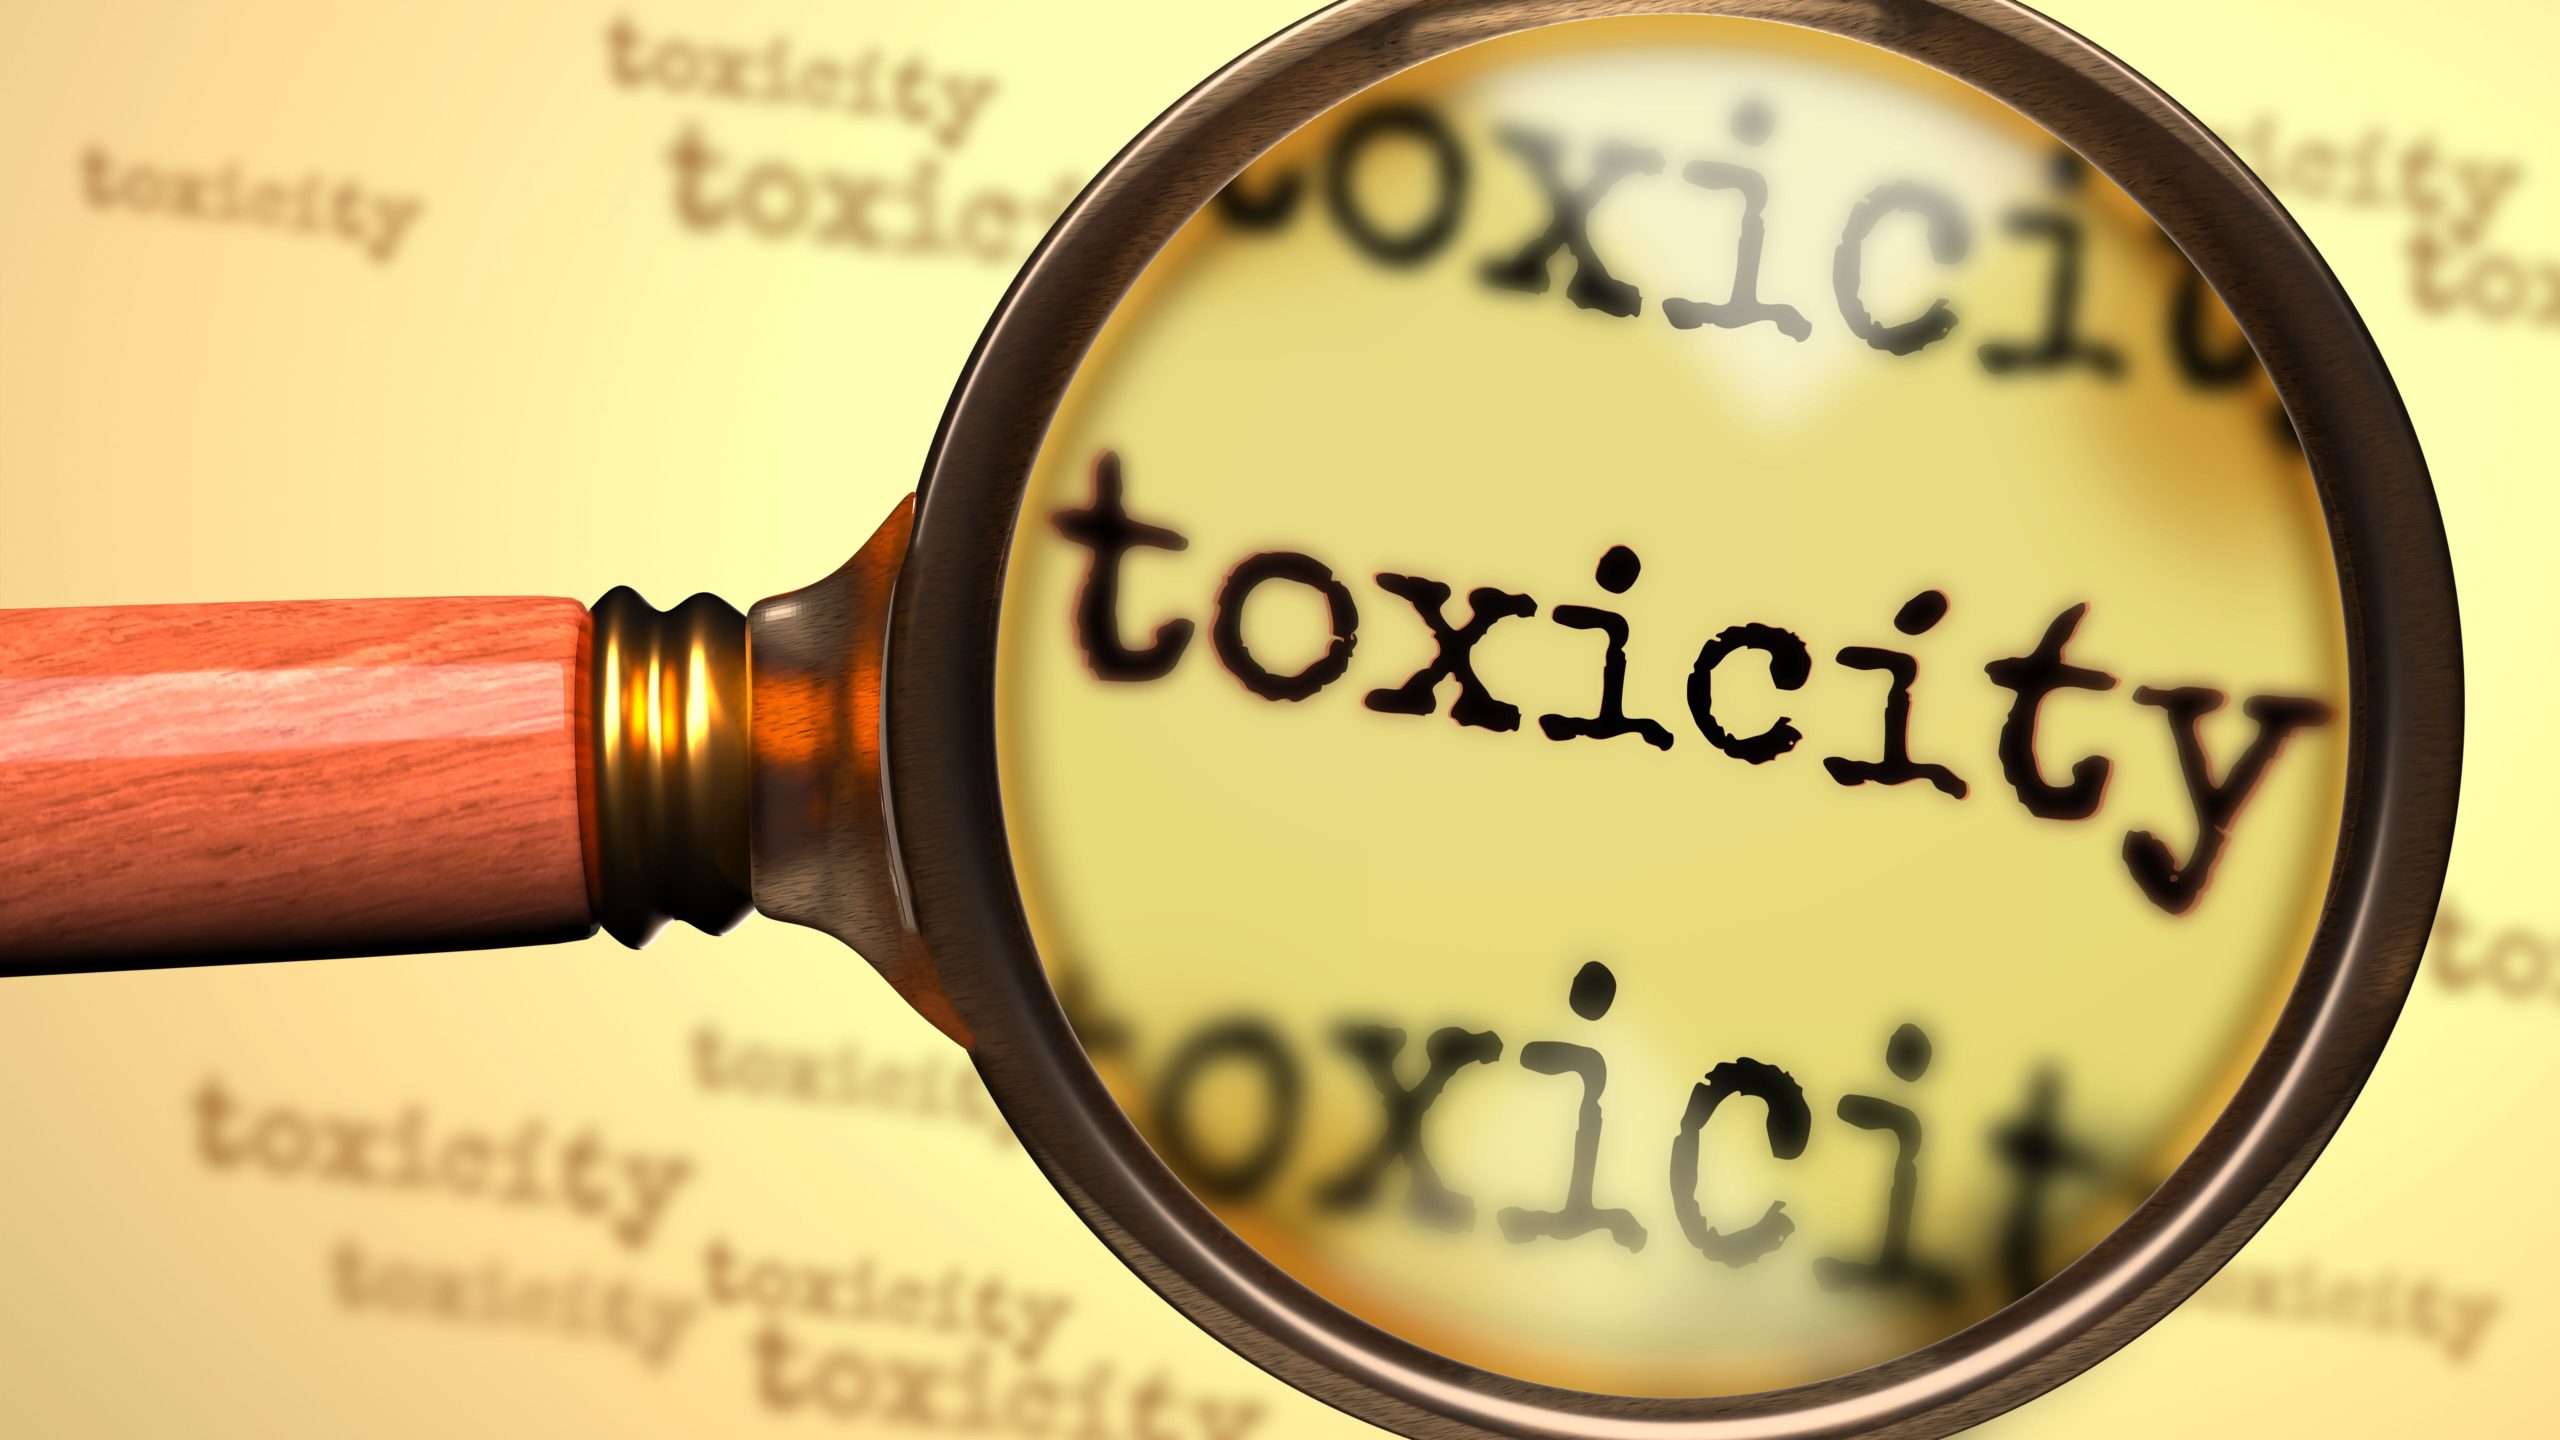 Toxicity - magnifying glass enlarging English word Toxicity to symbolize taking a closer look